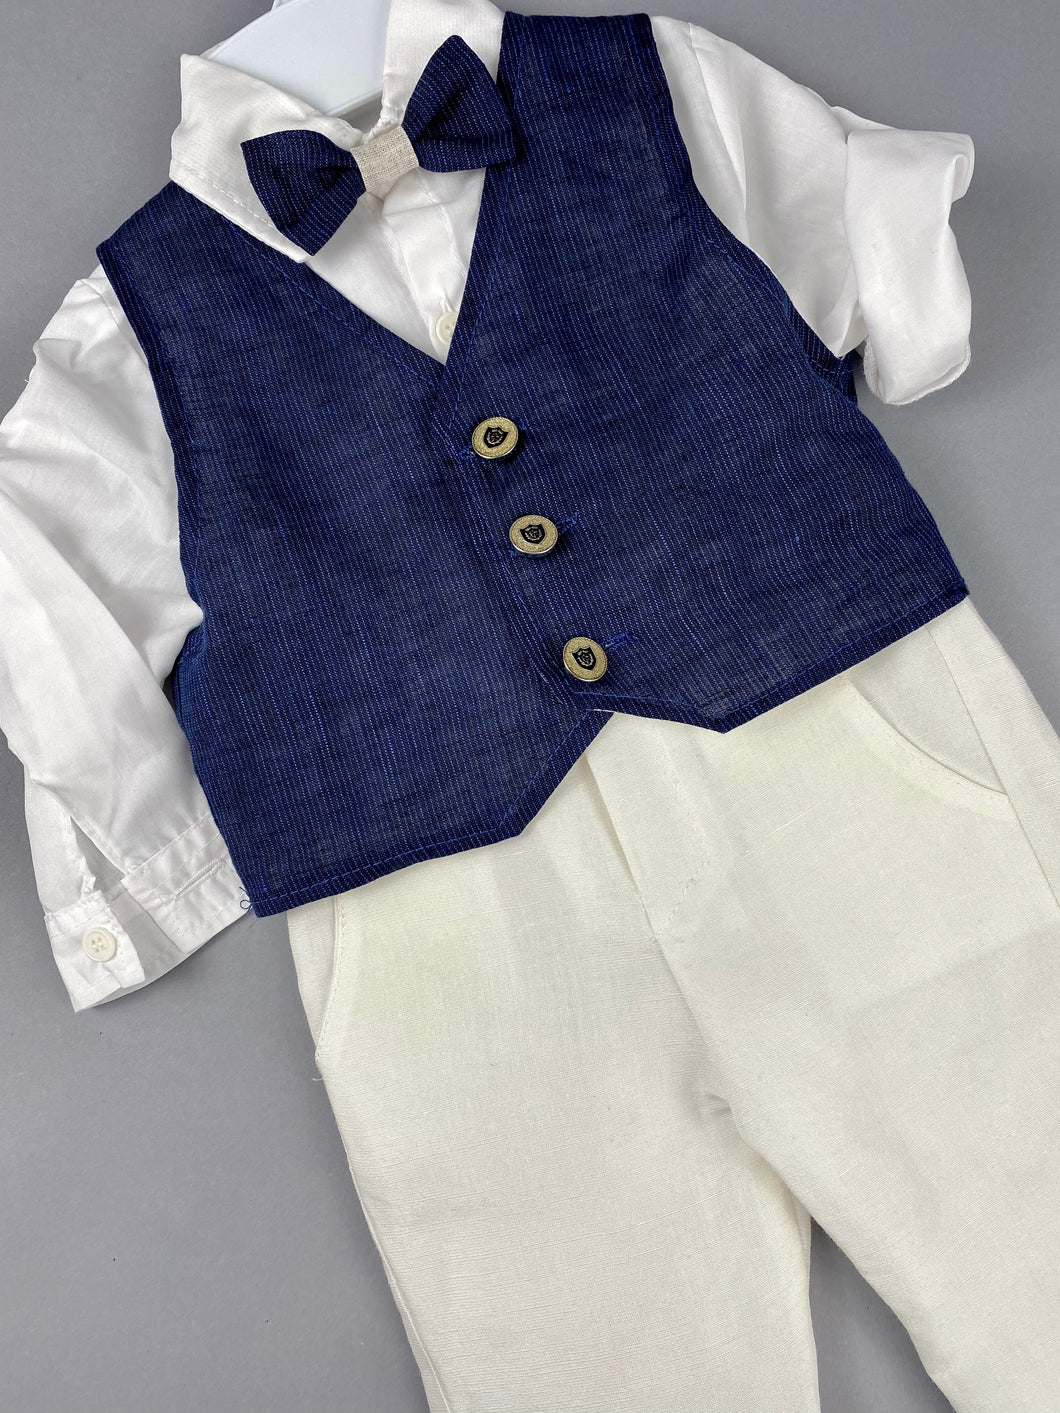 Rosies Collections 7pc full linen suit, Dress shirt, Cuff sleeves, Pants, Hoodie Jacket, Vest, Belt or Suspenders, Cap. Made in Greece exclusively for Rosies Collections S201923